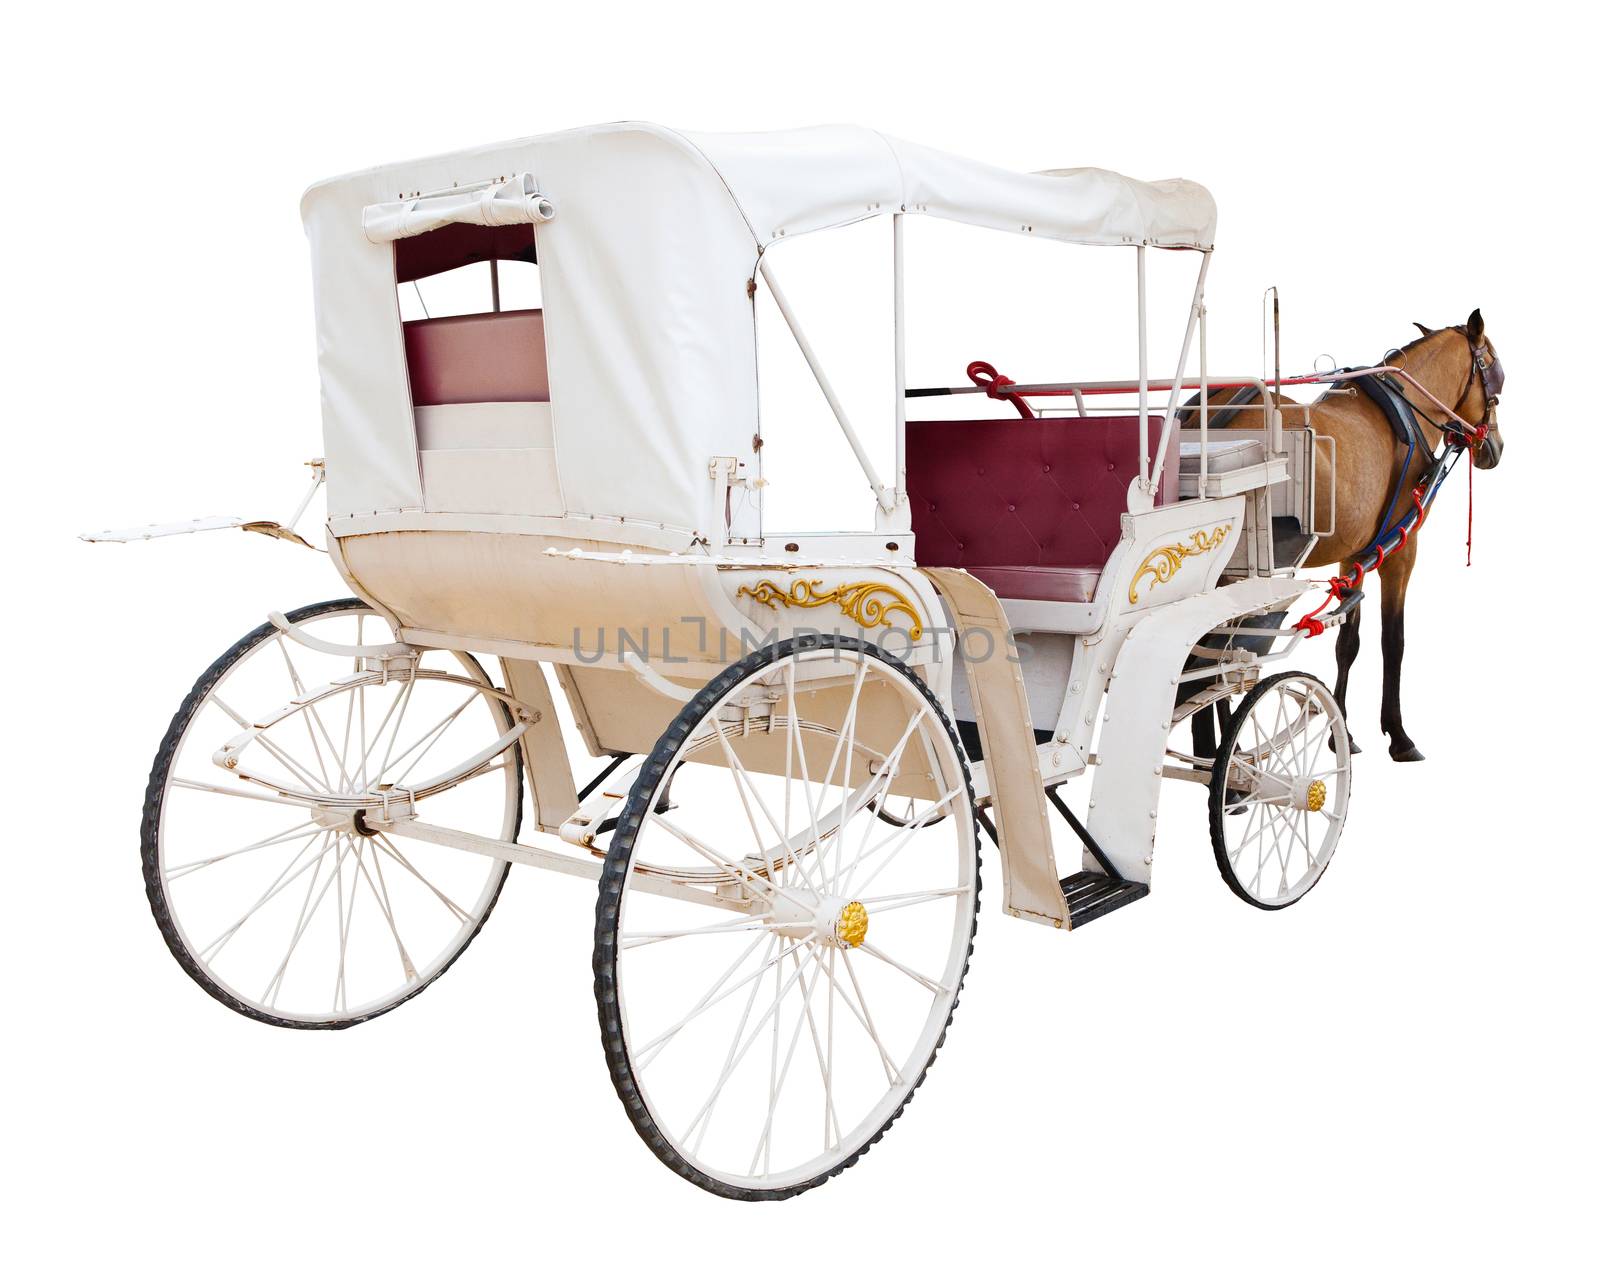 rear view of horse fairy tale carriage cabin isolated white background use for transport decoration object 